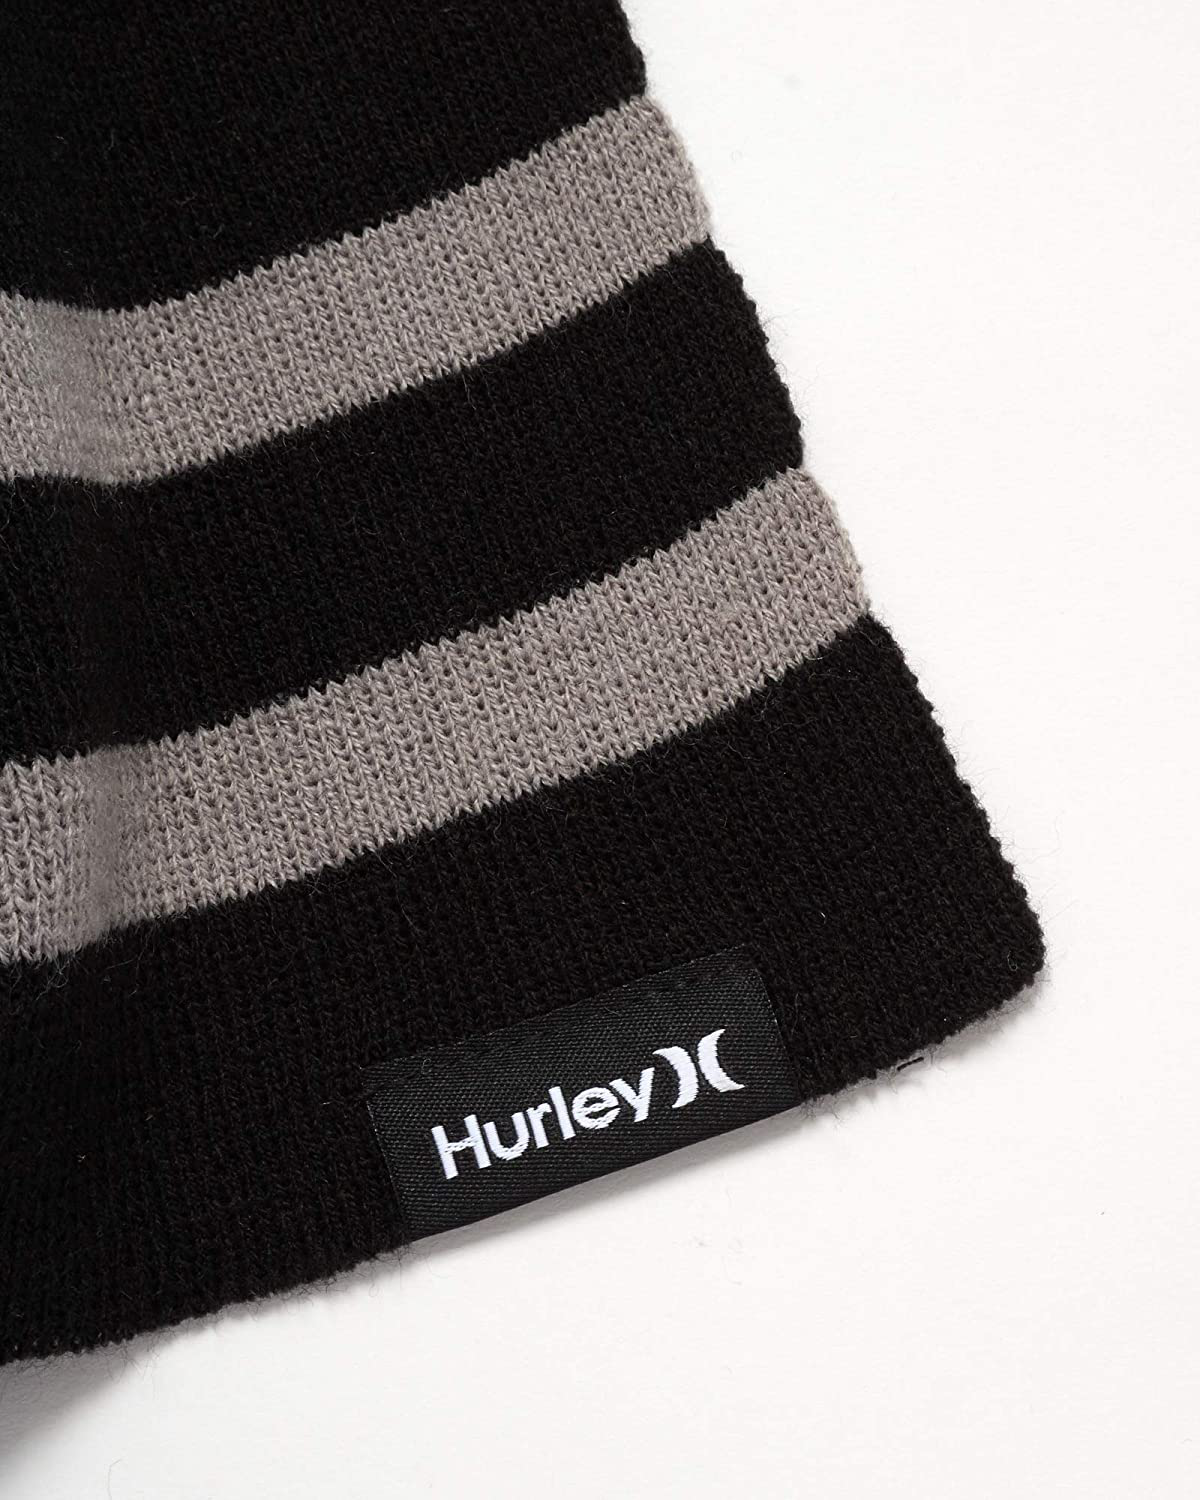 Hurley Winter Set Black Men's Beanie and Scarf